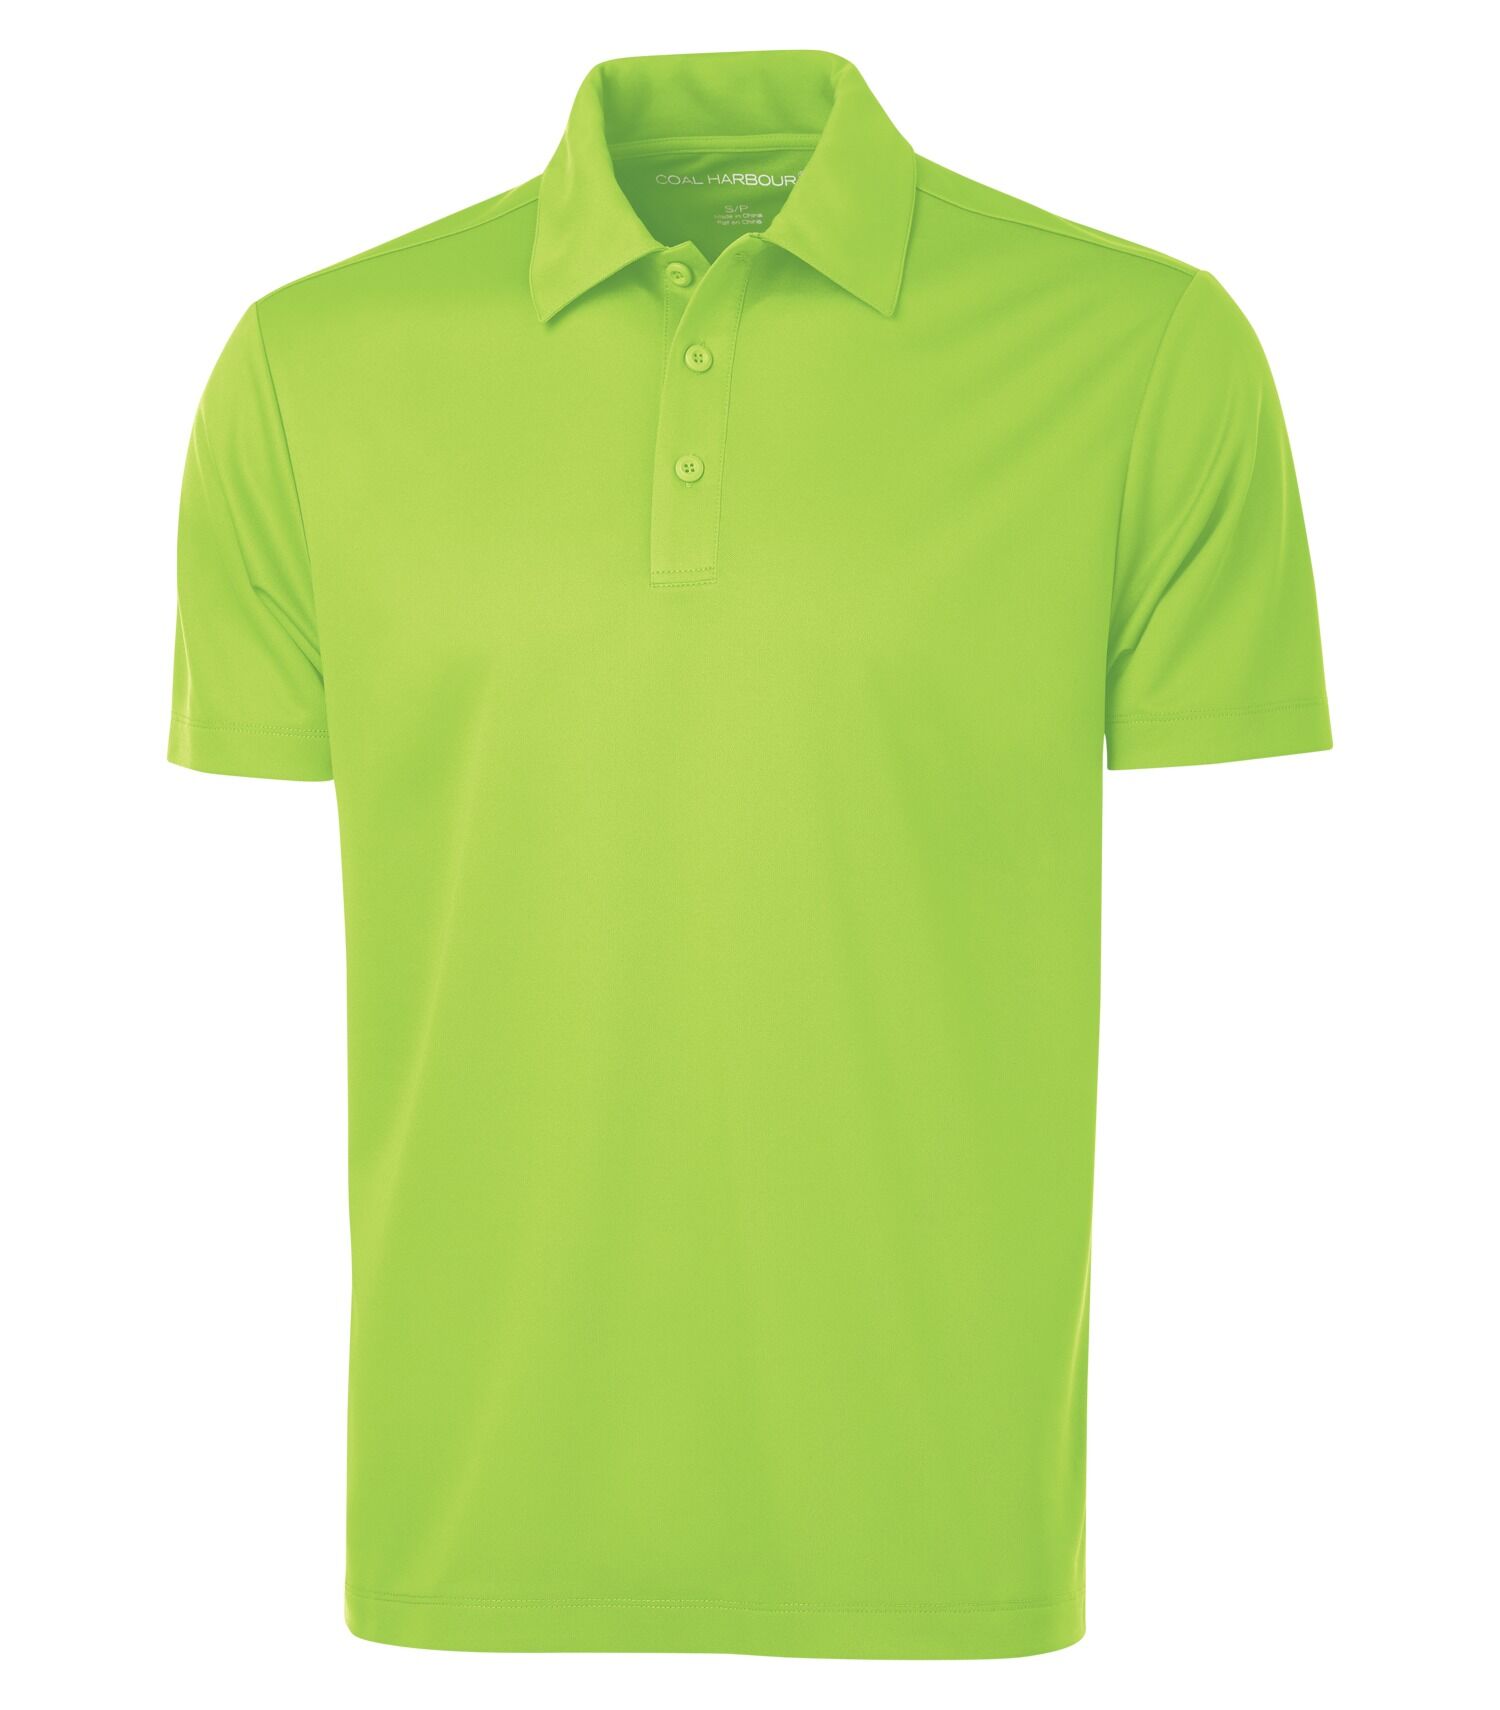 COAL HARBOUR EVERYDAY SPORT SHIRT #S4007 Lime Green